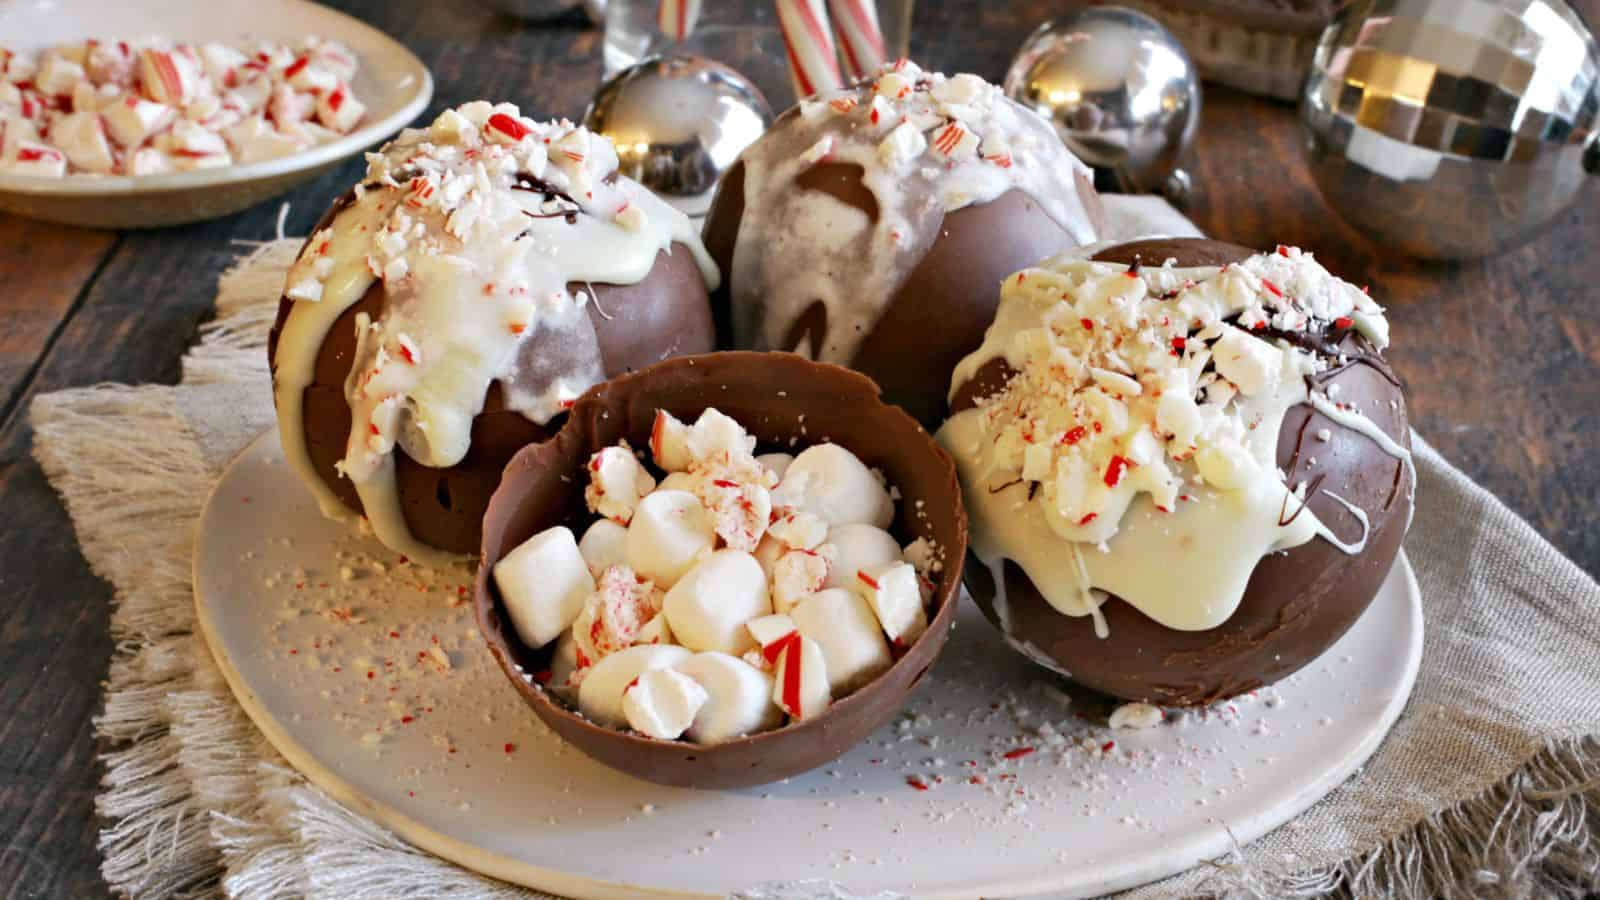 <p>Peppermint Hot Chocolate Bombs are a festive and fun treat that kids can help make during the holidays. Simply fill chocolate spheres with cocoa mix and crushed candy canes for a minty twist. Pour hot milk over them to watch them explode into creamy hot chocolate. With ingredients like chocolate, cocoa powder, and candy canes, they’re easy to customize and enjoy.<br><strong>Get the Recipe: </strong><a href="https://reneenicoleskitchen.com/peppermint-hot-chocolate-bombs/?utm_source=msn&utm_medium=page&utm_campaign=30%20fun%20snacks%20to%20make%20with%20kids">Peppermint Hot Chocolate Bombs</a></p>